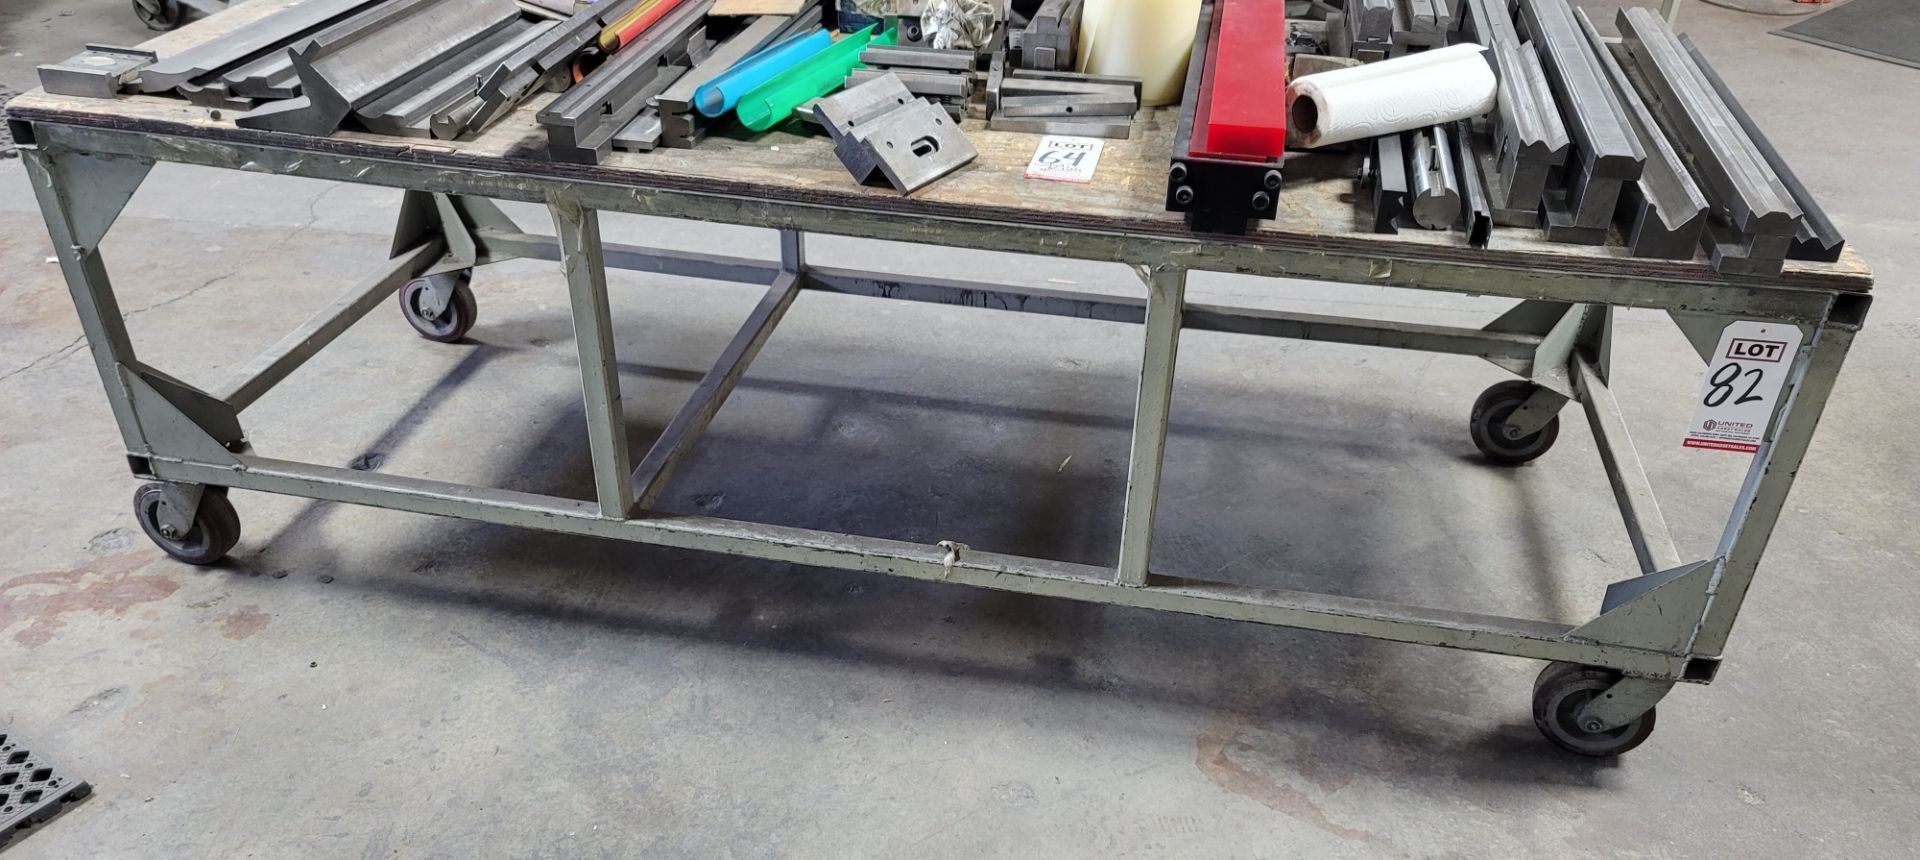 STEEL CART W/ 87" X 3' PLYWOOD TOP, CONTENTS NOT INCLUDED, (LOCATION: 2174 W 2300 S)